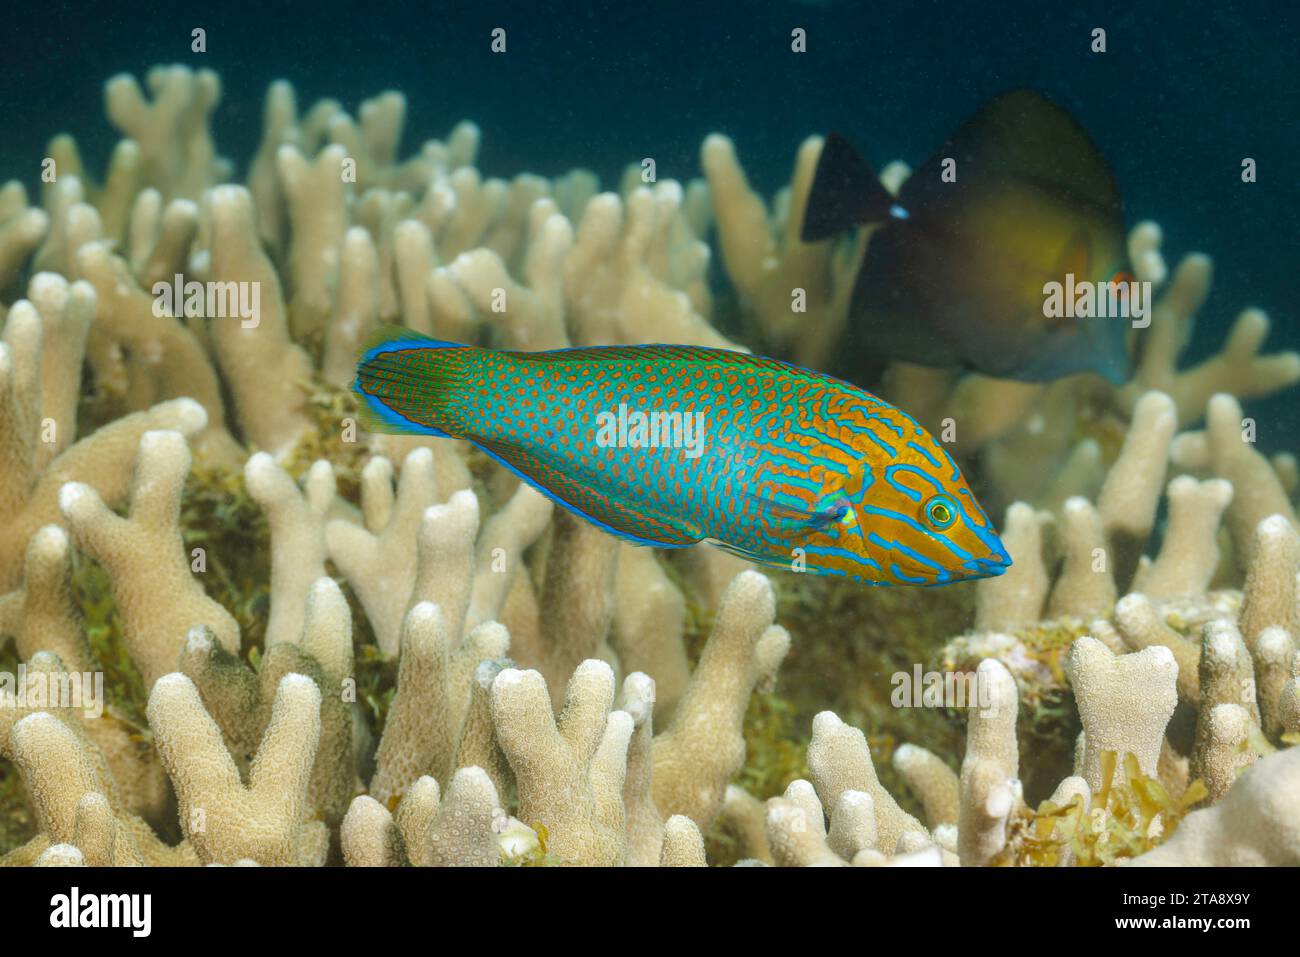 The chain-lined wrasse, Halichoeres leucurus, is also referred to as a striped wrasse, Yap, Micronesia. Stock Photo